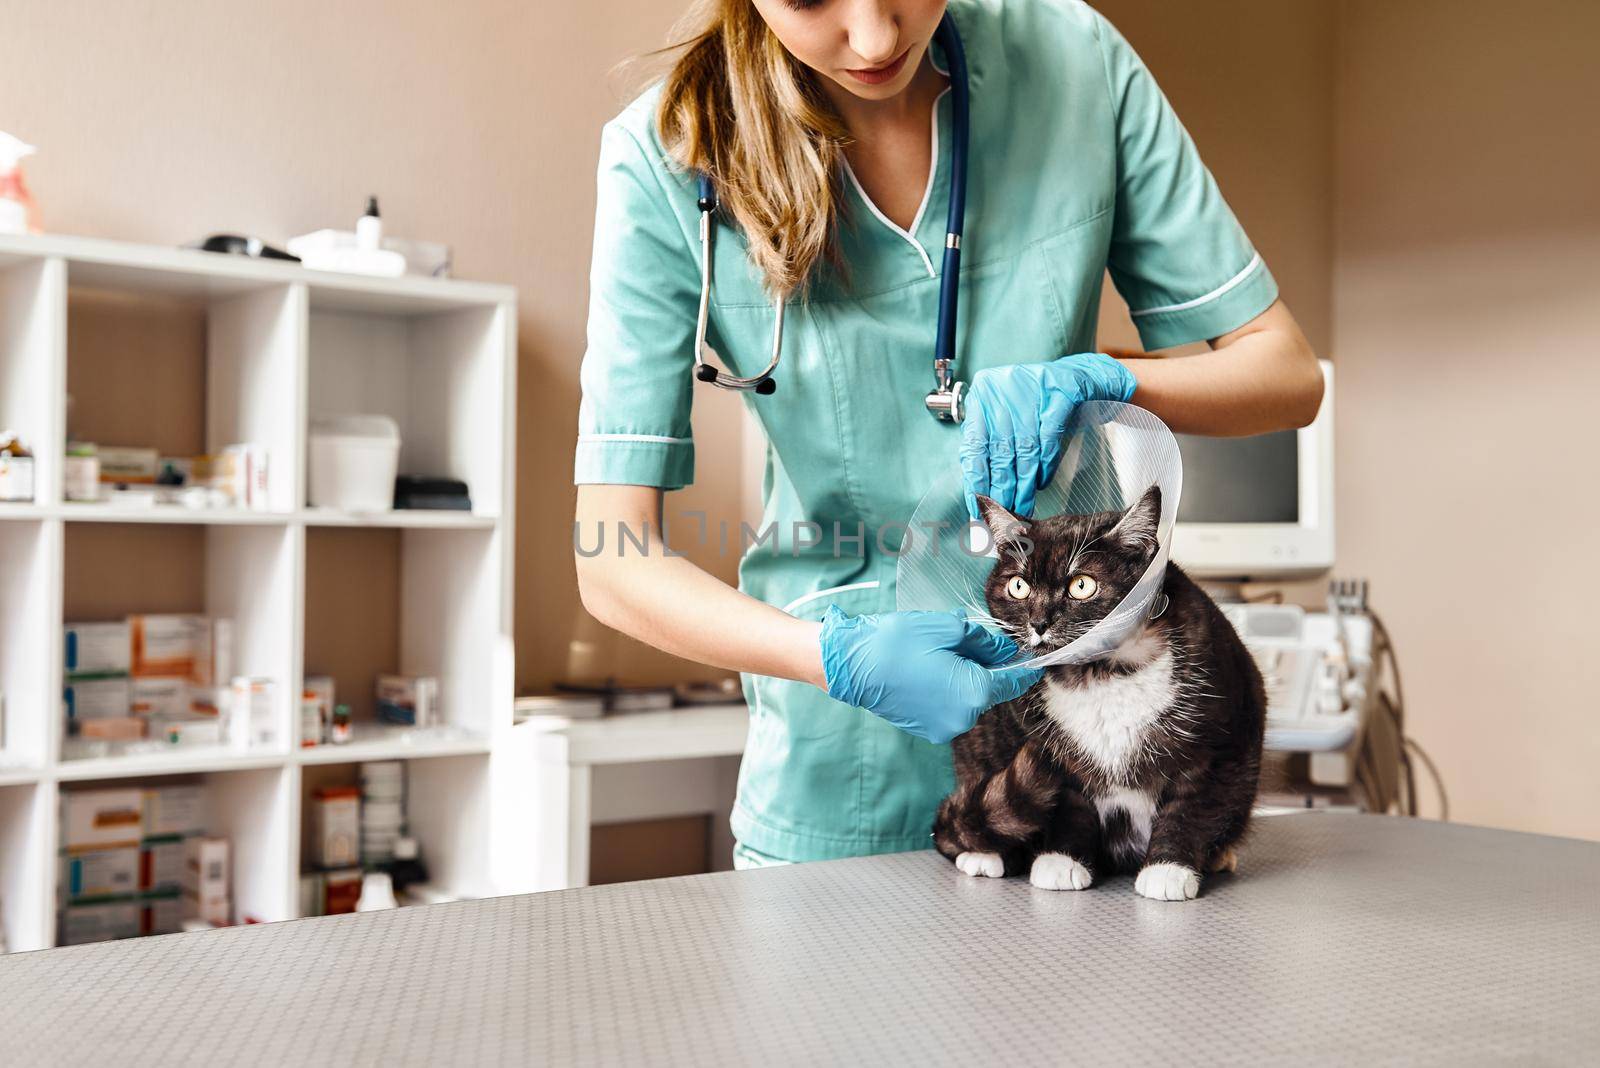 Working process. Female veterinarian in work uniform putting on a protective plastic collar to a large black cat lying on the table in veterinary clinic. Pet care concept. Medicine concept. Animal hospital